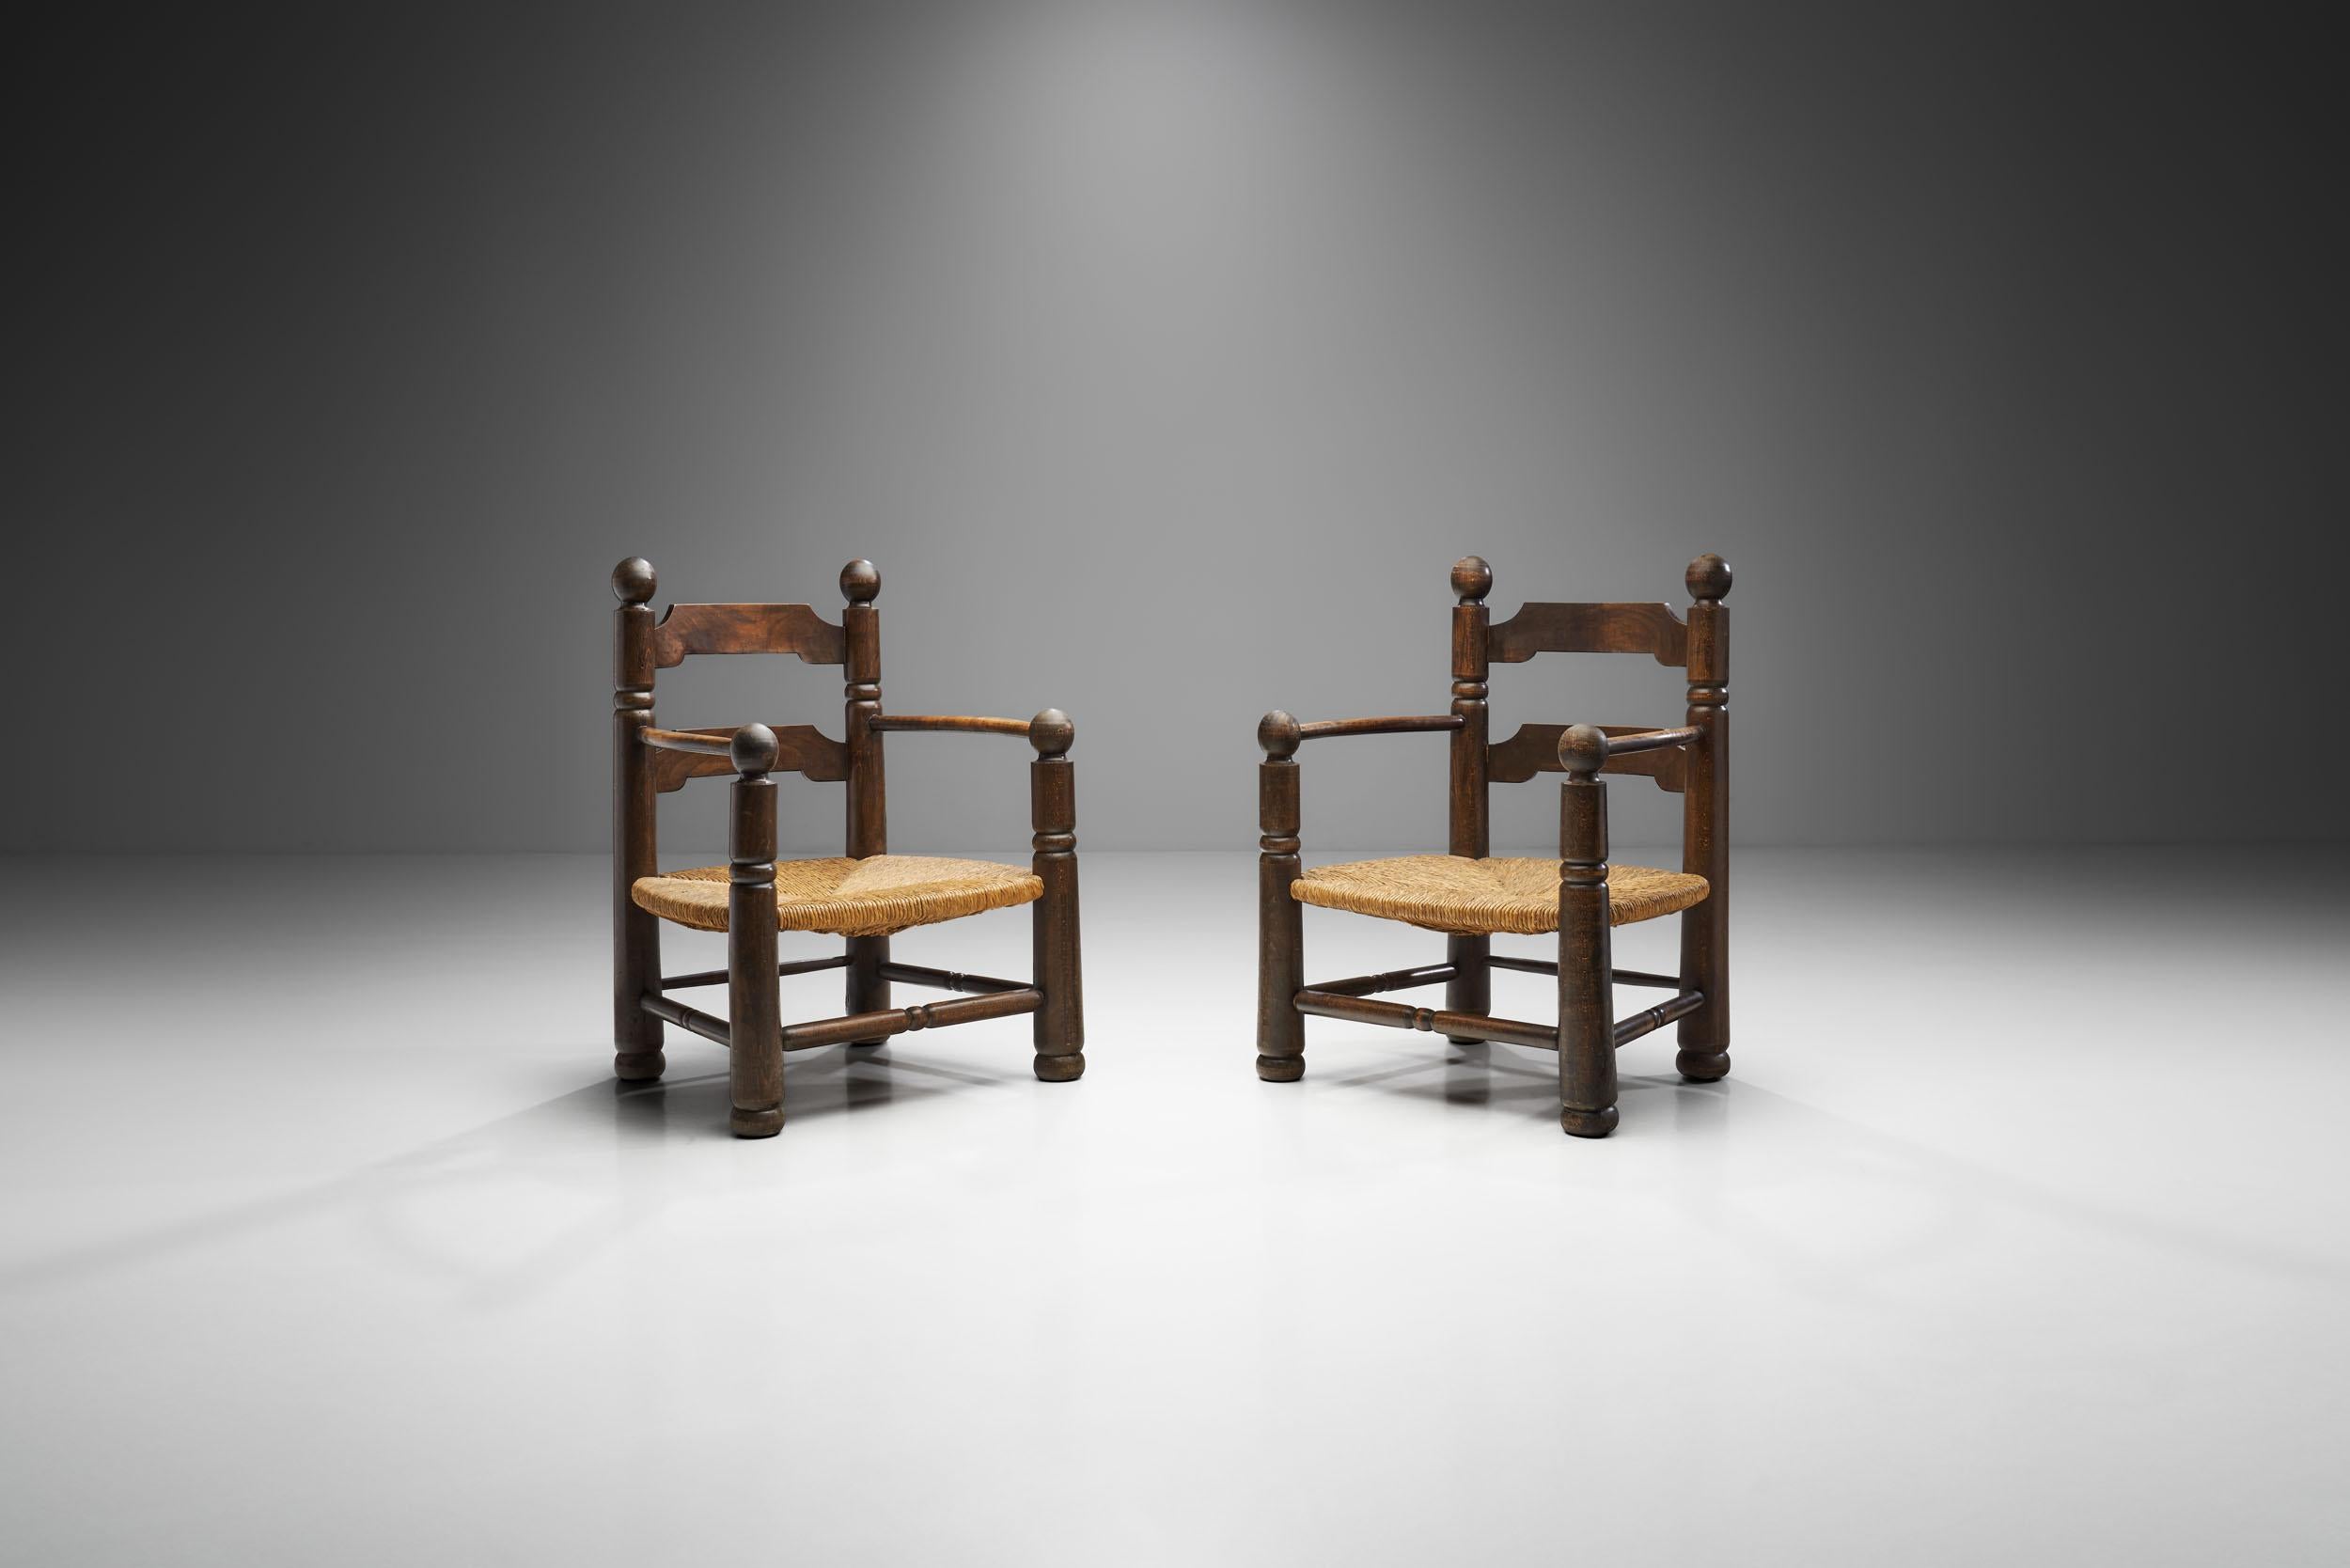 Turned chairs — sometimes called thrown chairs or spindle chairs — represent a style of Elizabethan or Jacobean turned furniture that had a vogue in late 16th and early 17th century England, New England and Holland. The technique was carried on to